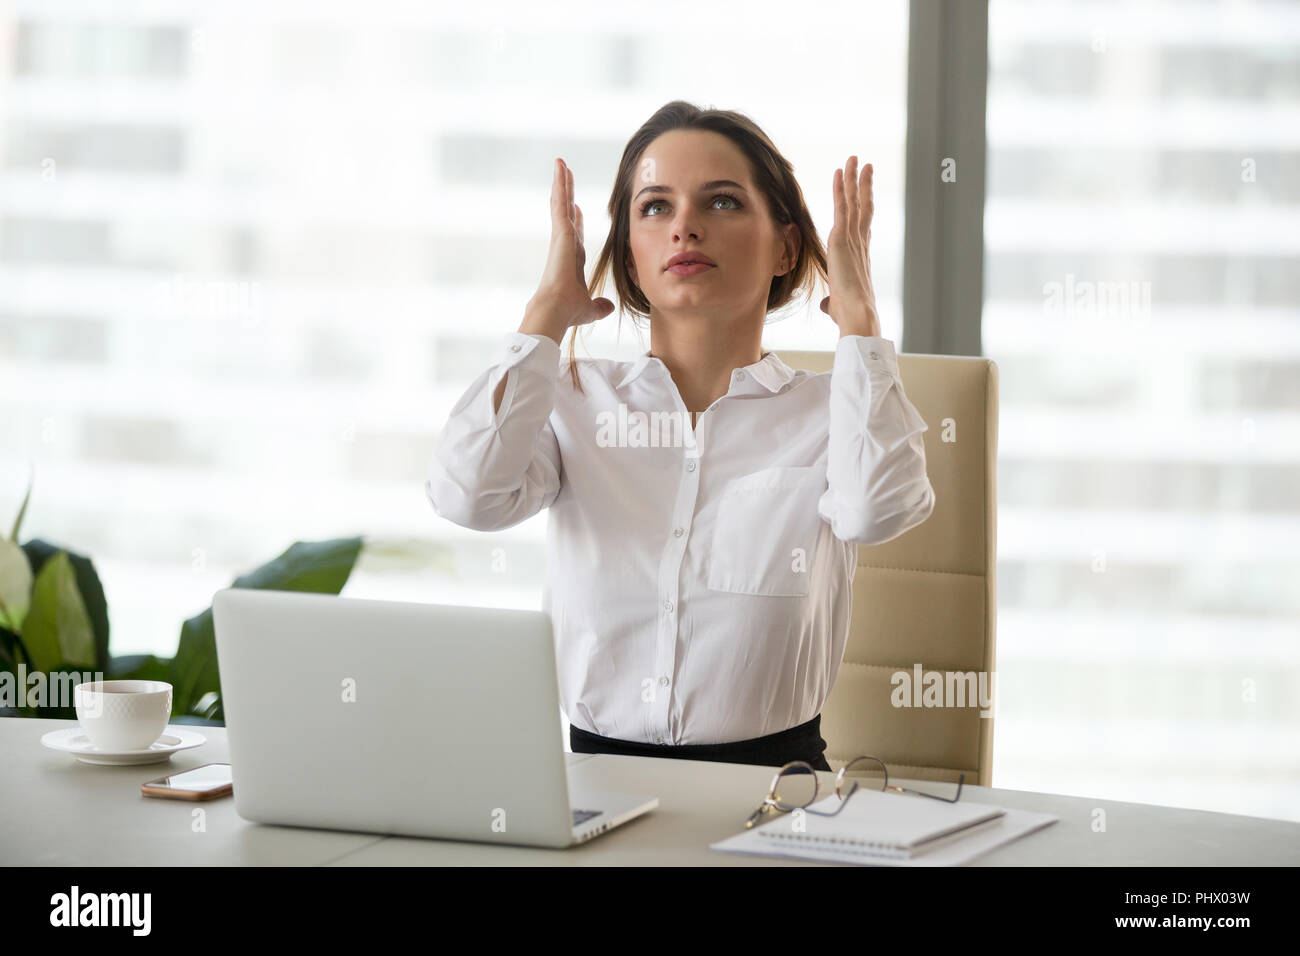 Angry mad businesswoman feeling stressed at work having nervous  Stock Photo